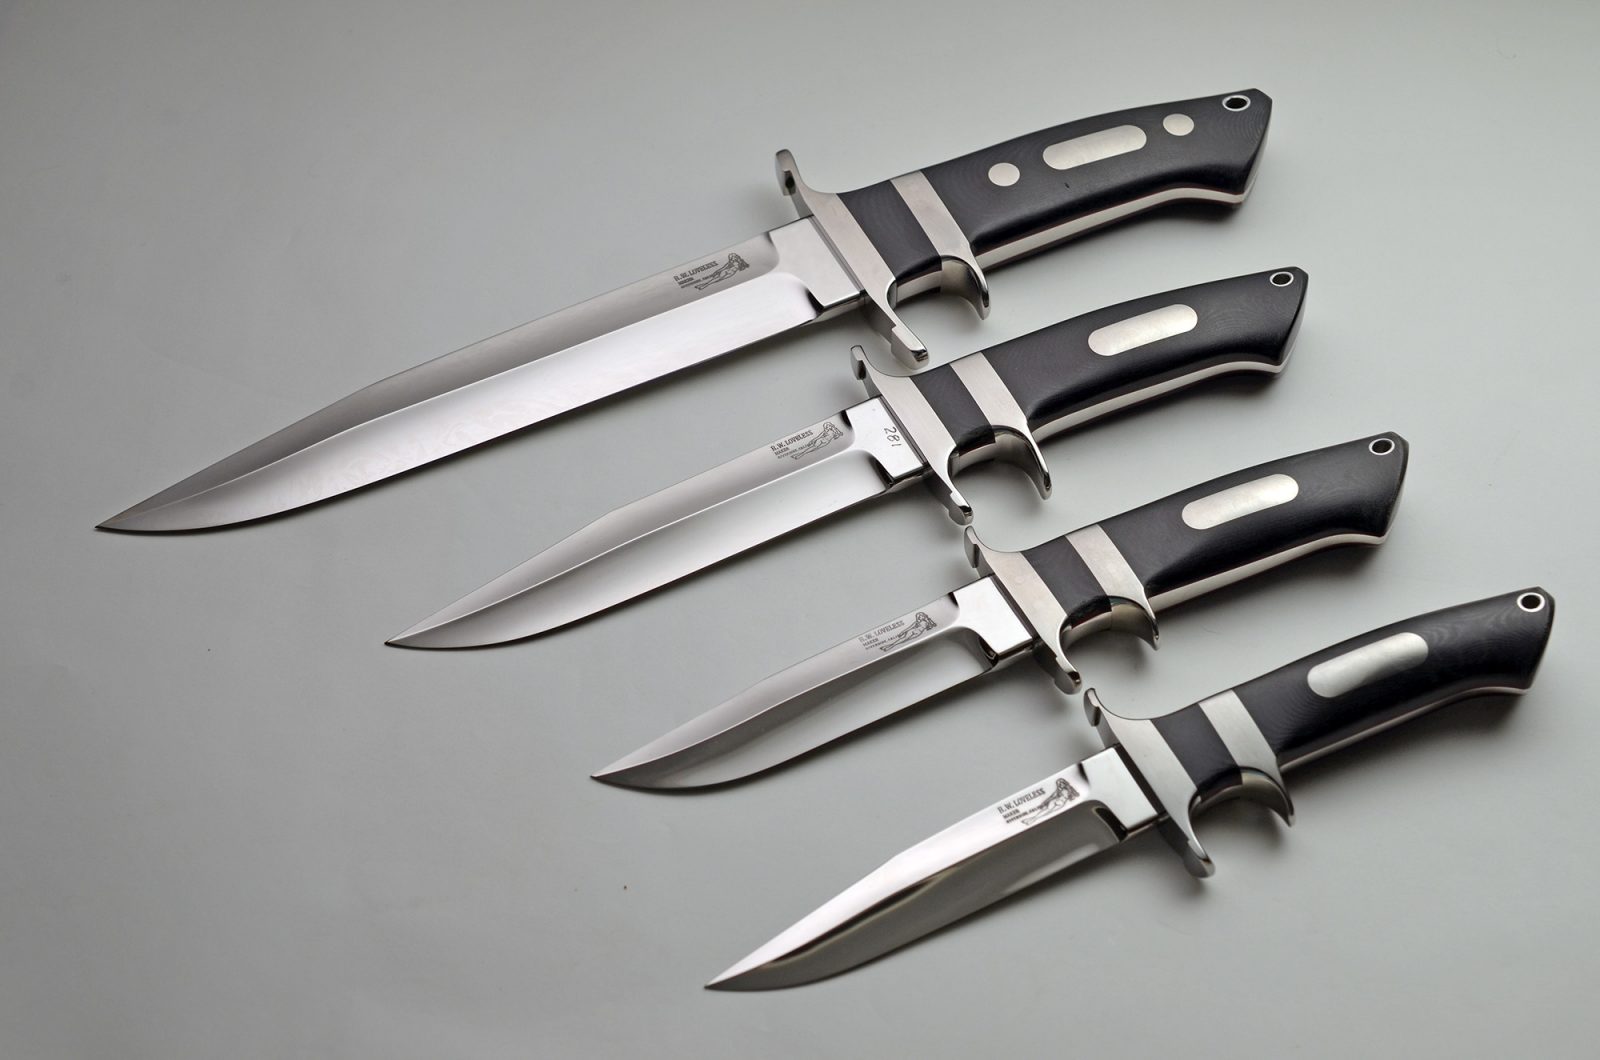 A Collection of the 4 Types of Knife Forging - Exquisite Knives